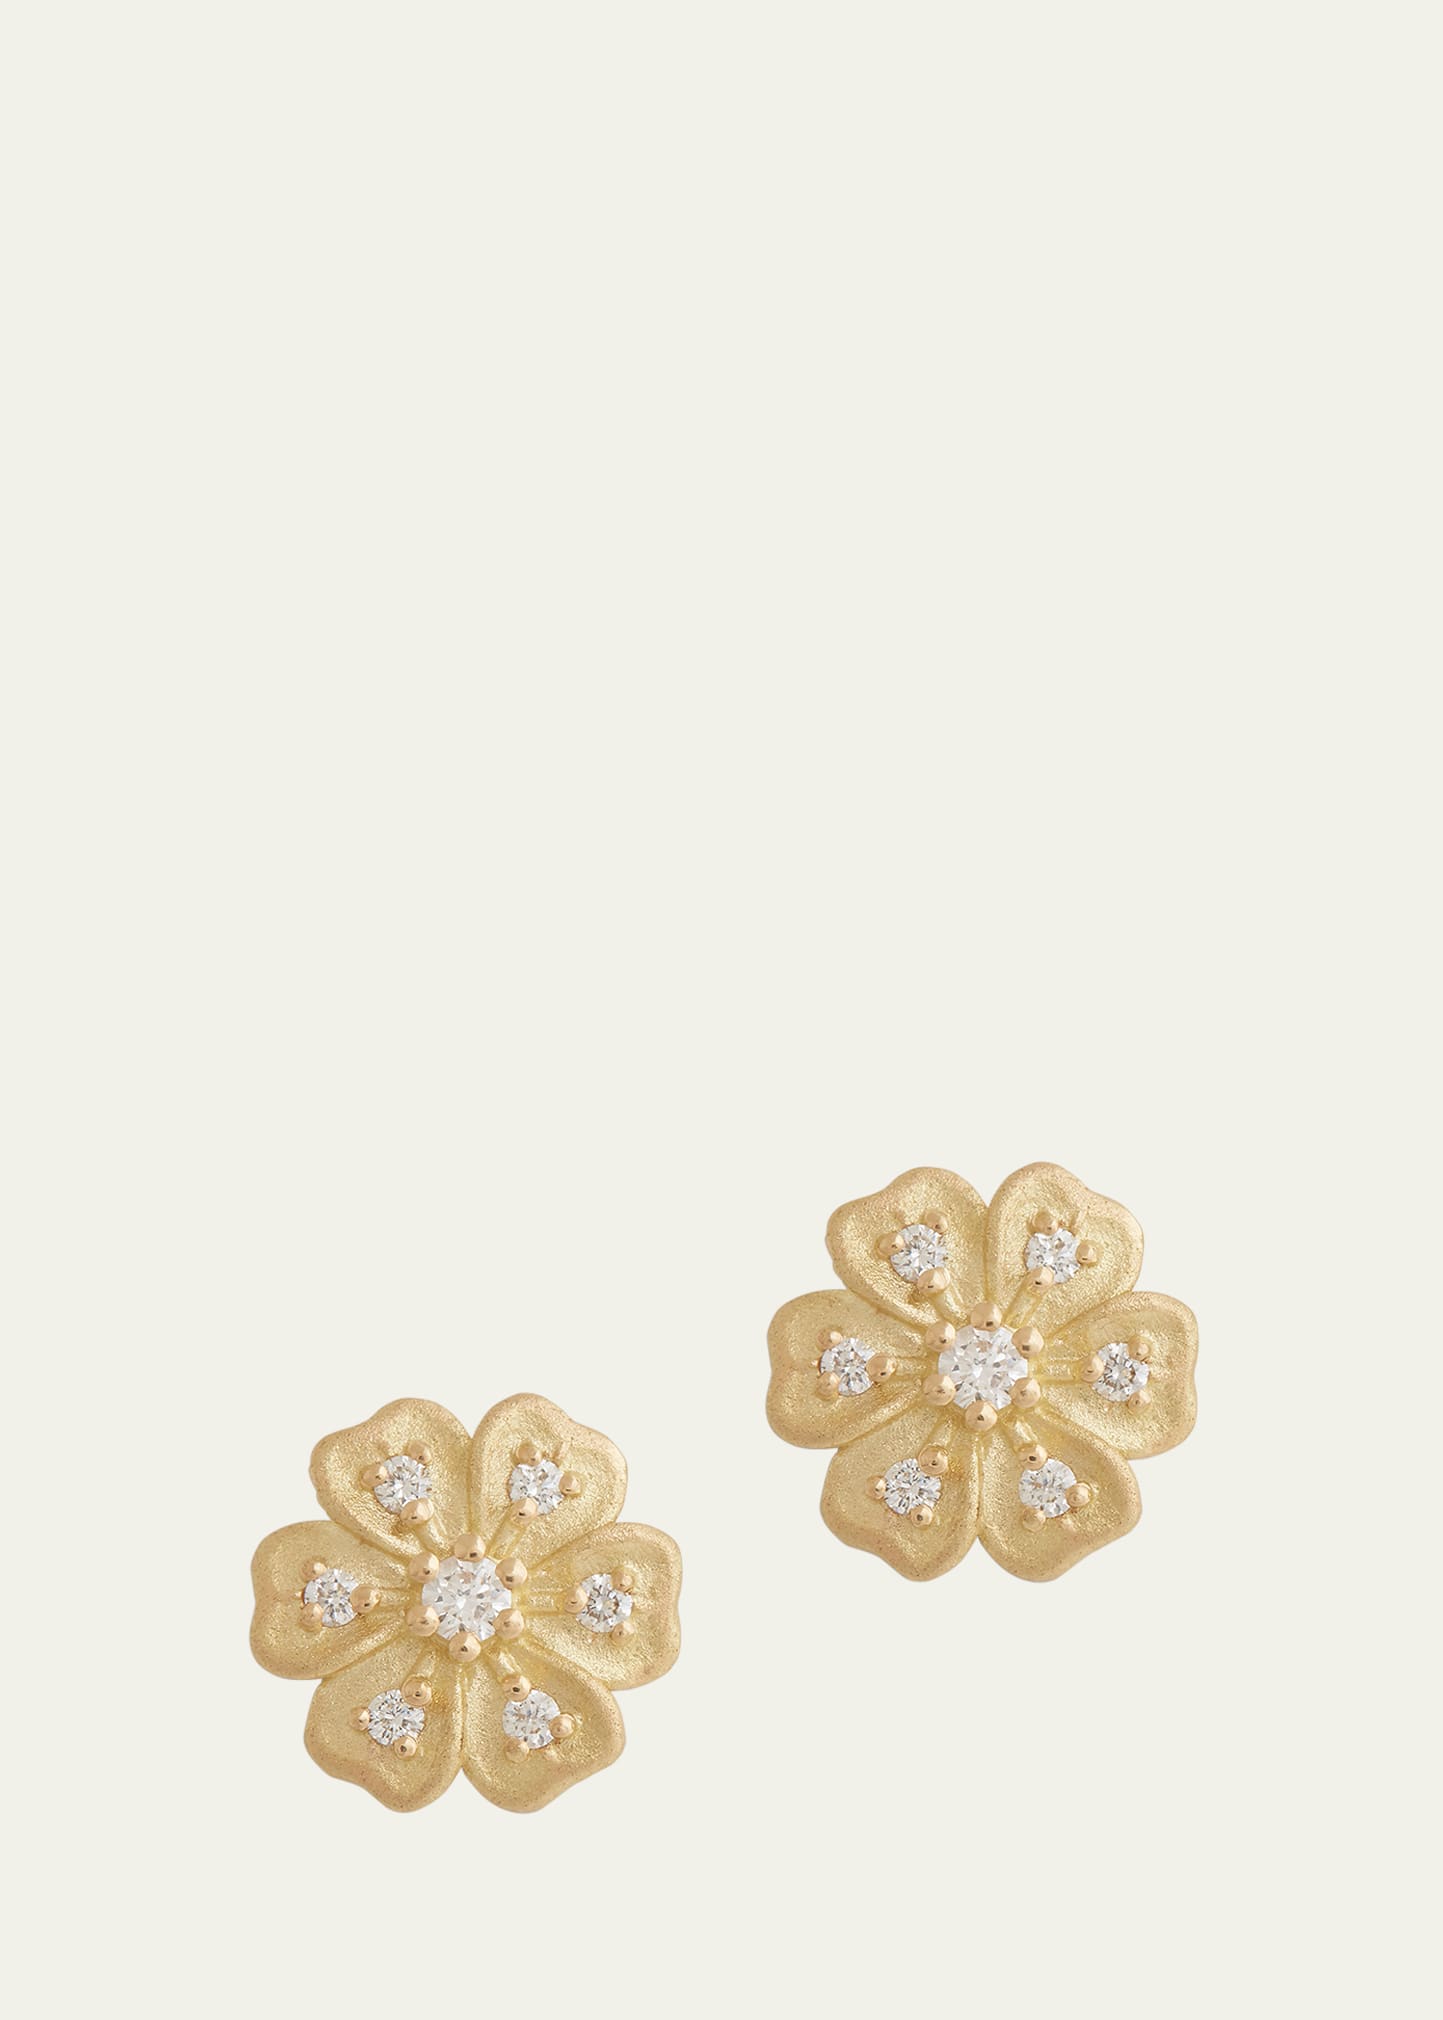 18K Yellow Gold Floral Stud Earrings with Diamonds